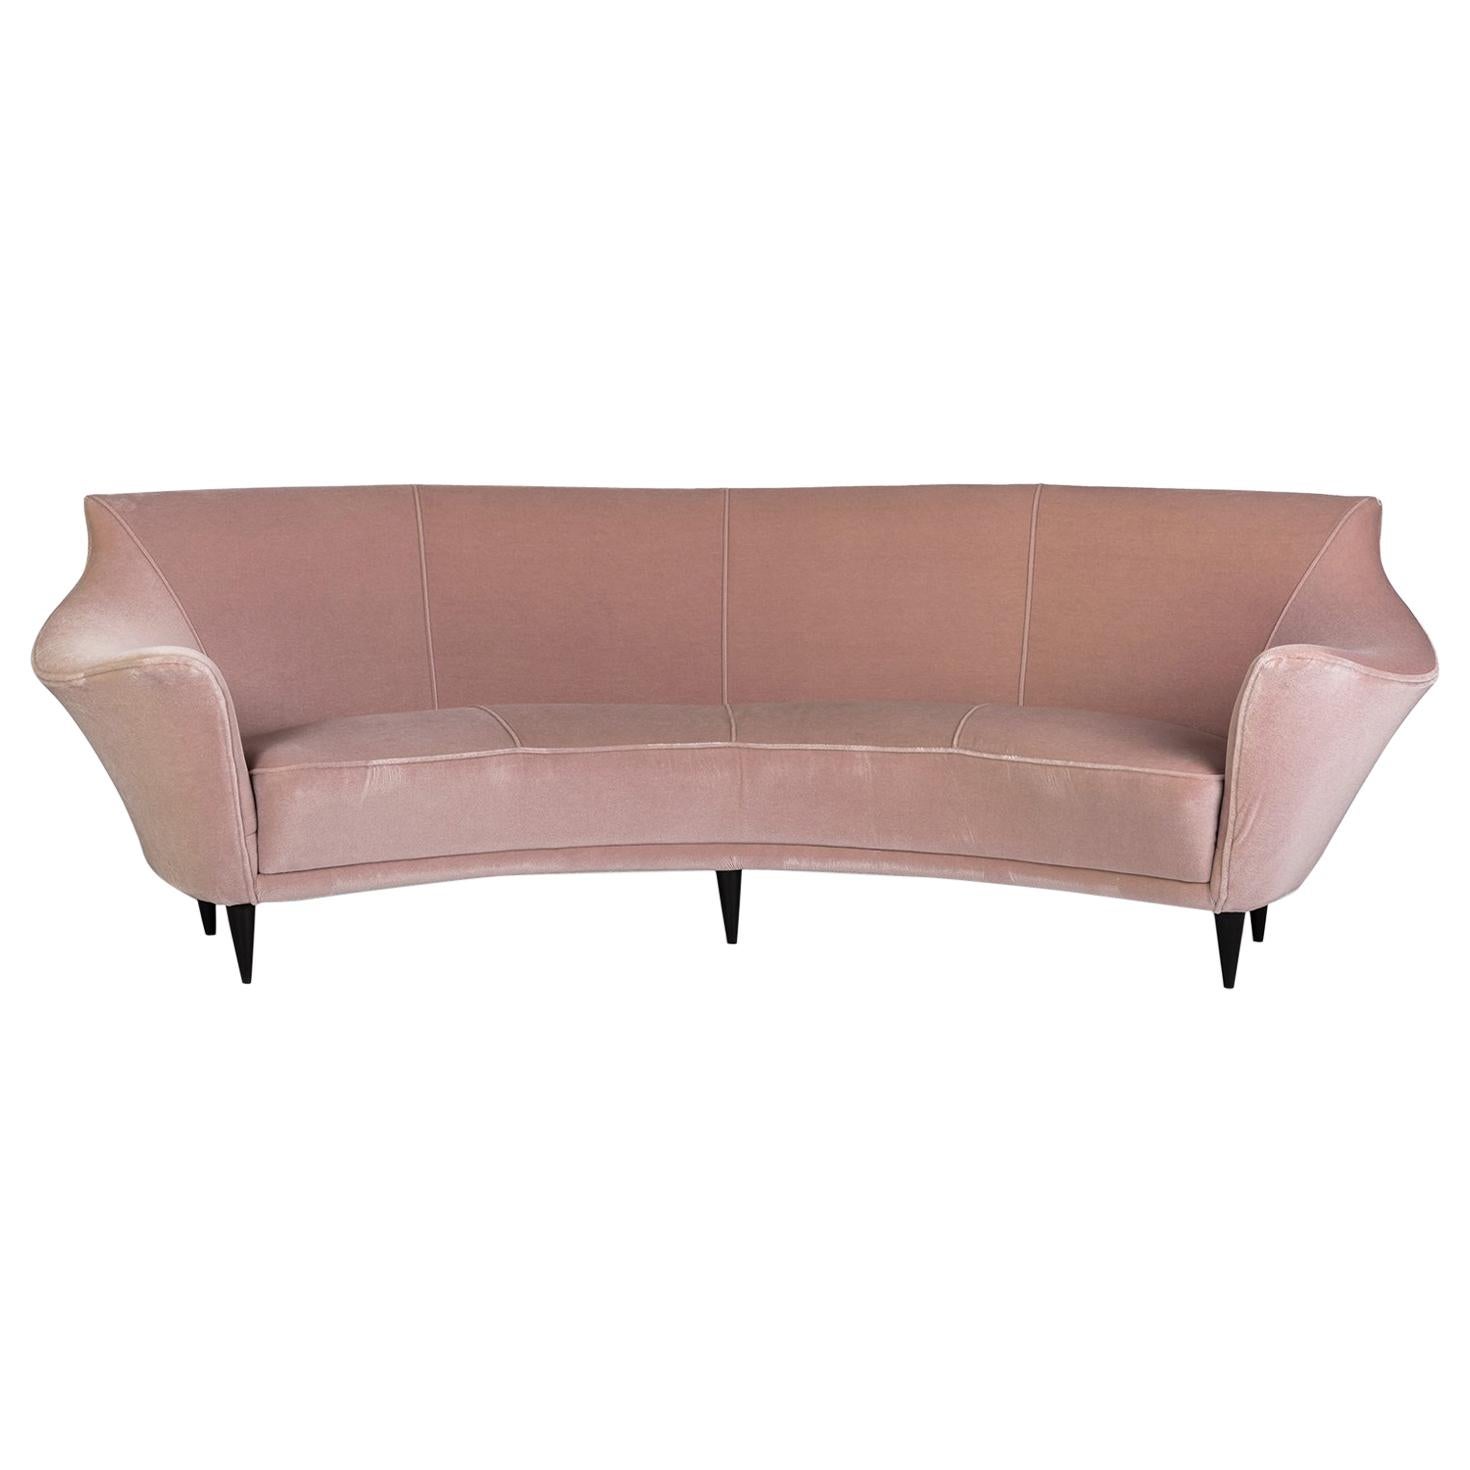 Ico Parisi Curved Four Seat Sofa, Italy, 1951 For Sale